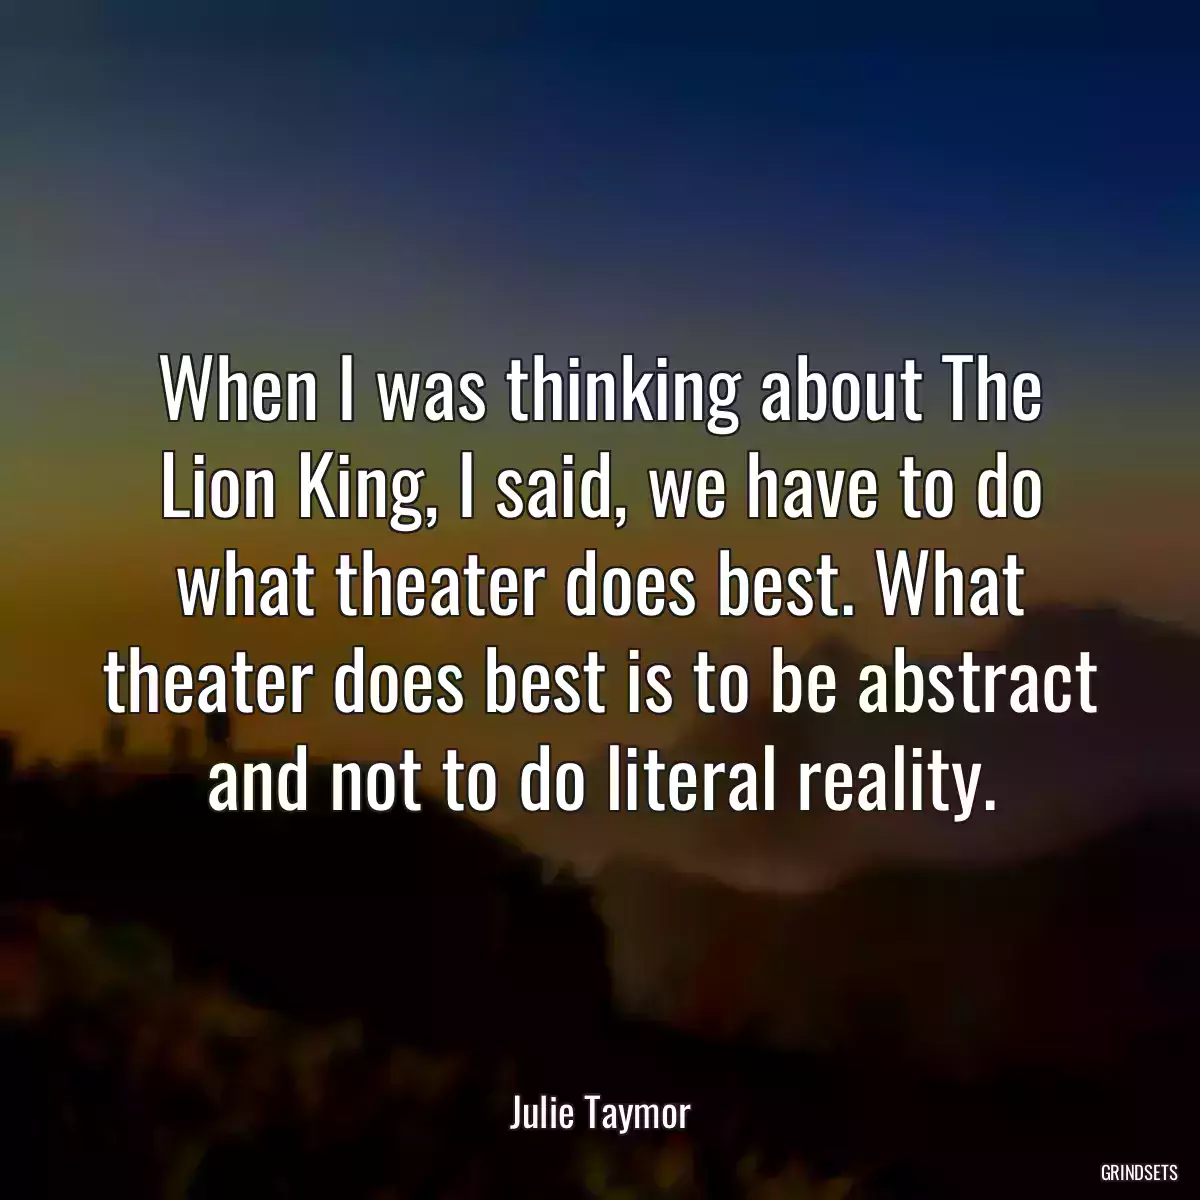 When I was thinking about The Lion King, I said, we have to do what theater does best. What theater does best is to be abstract and not to do literal reality.